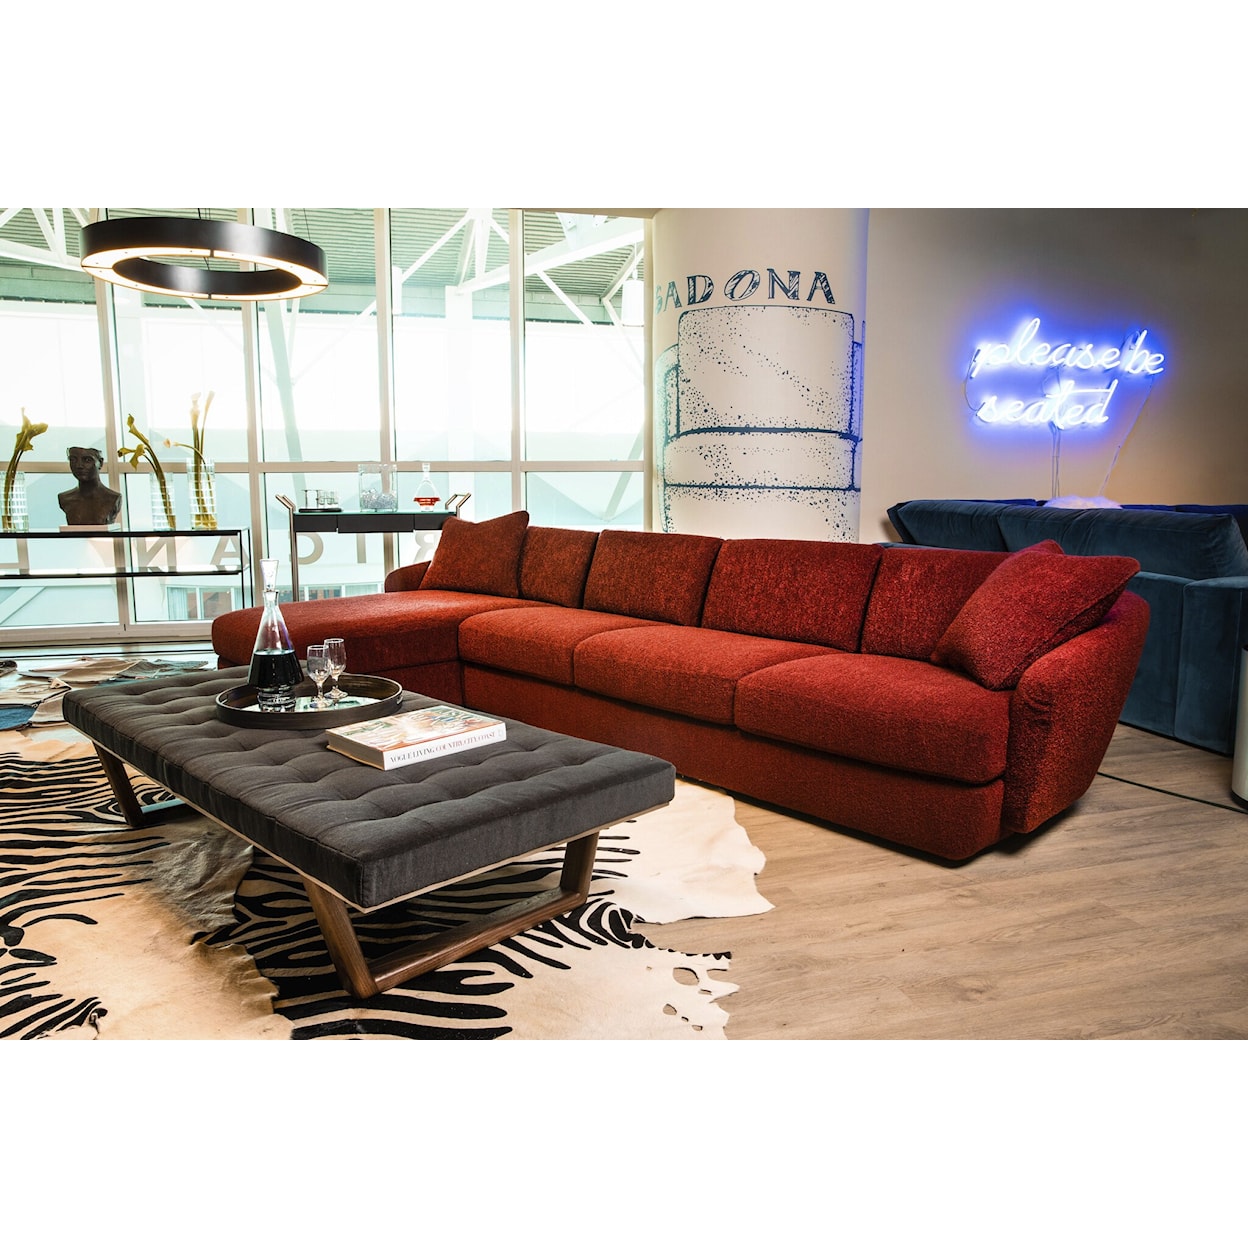 American Leather Sadona 4-Seat Sofa with Chaise